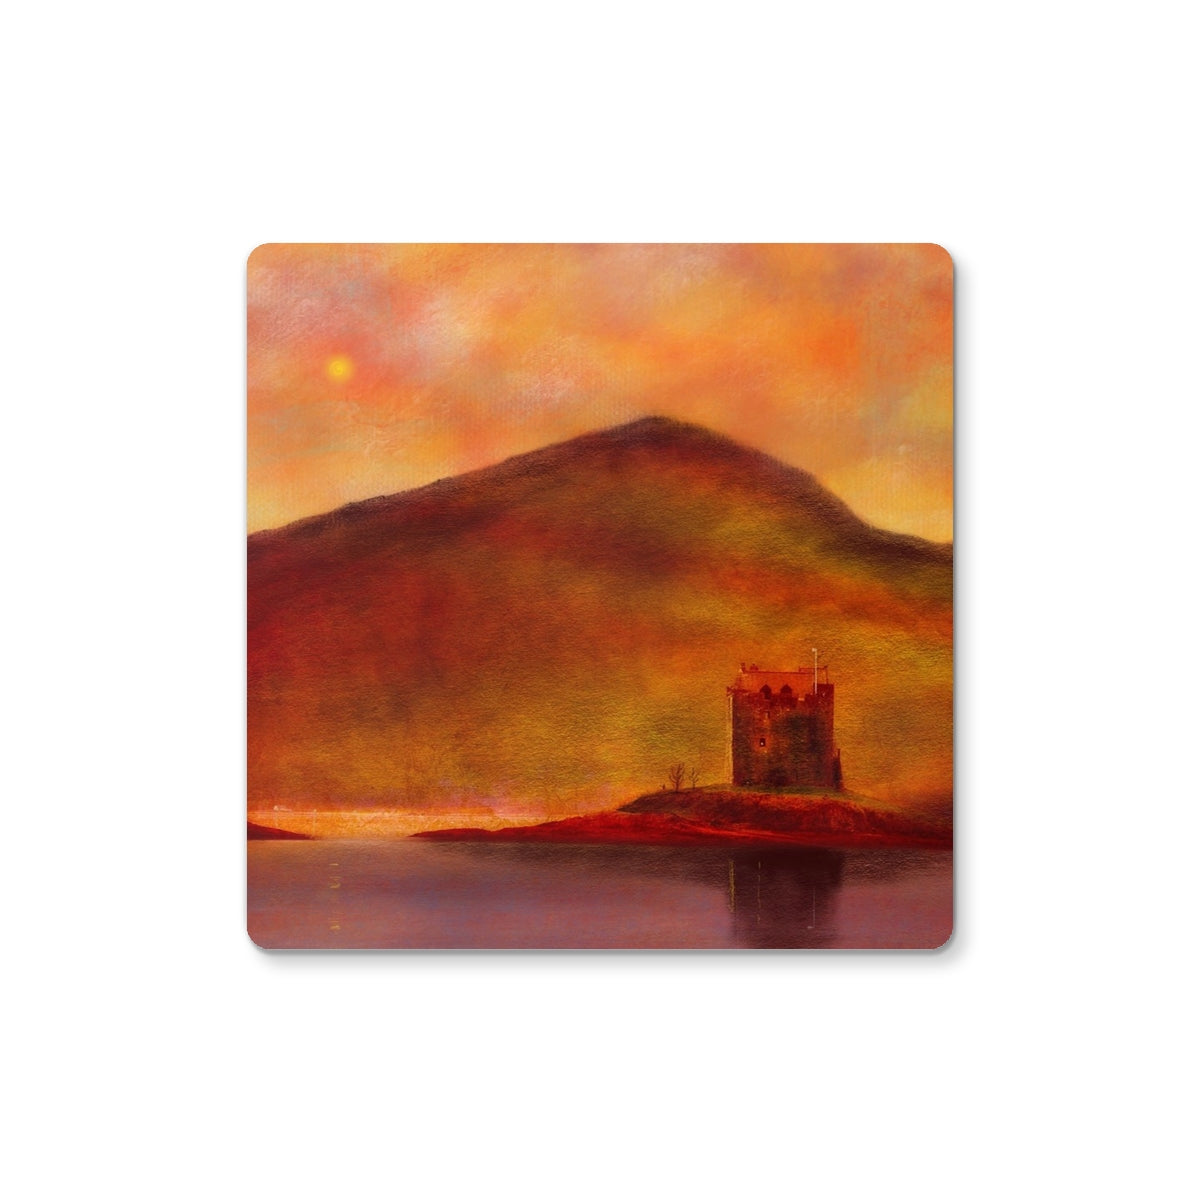 Castle Stalker Sunset Art Gifts Coaster-Coasters-Historic & Iconic Scotland Art Gallery-Single Coaster-Paintings, Prints, Homeware, Art Gifts From Scotland By Scottish Artist Kevin Hunter